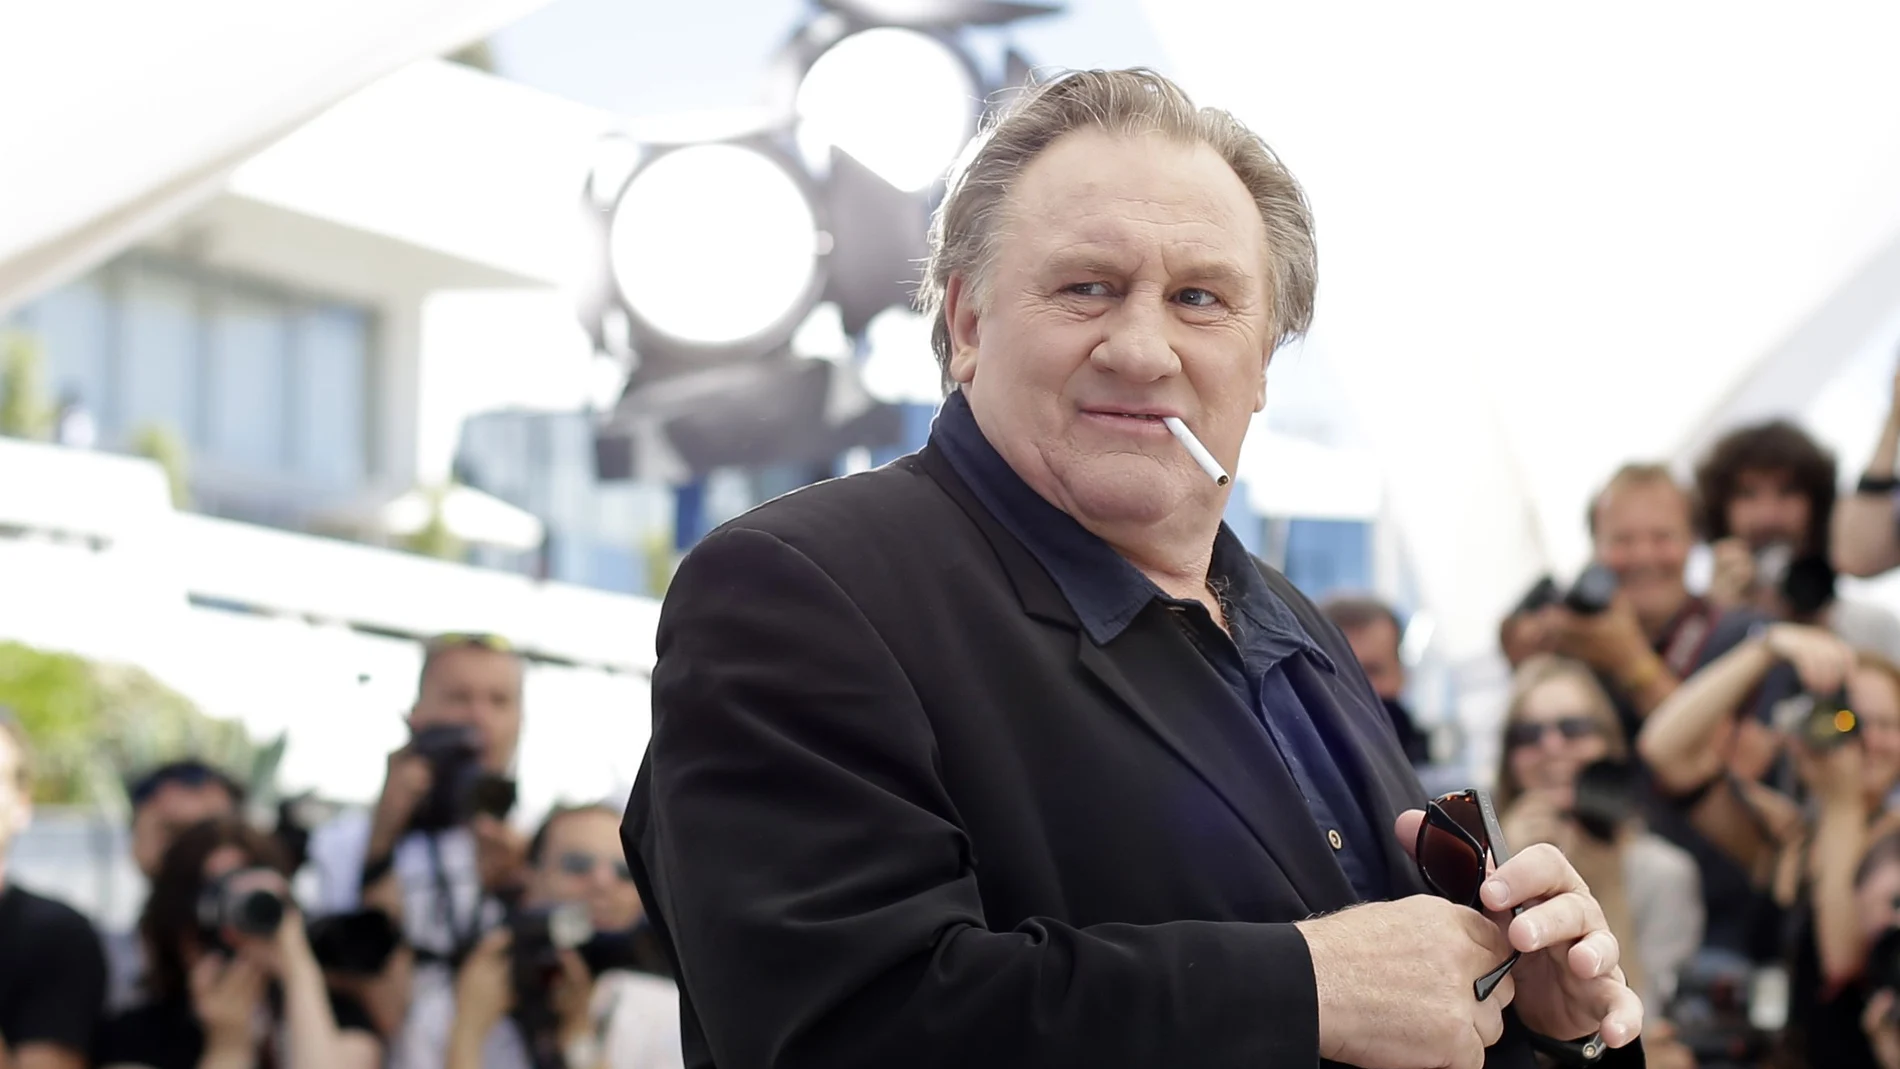 Actor Gerard Depardieu poses for photographers during a photo call for the film Valley of Love, at the 68th international film festival, Cannes